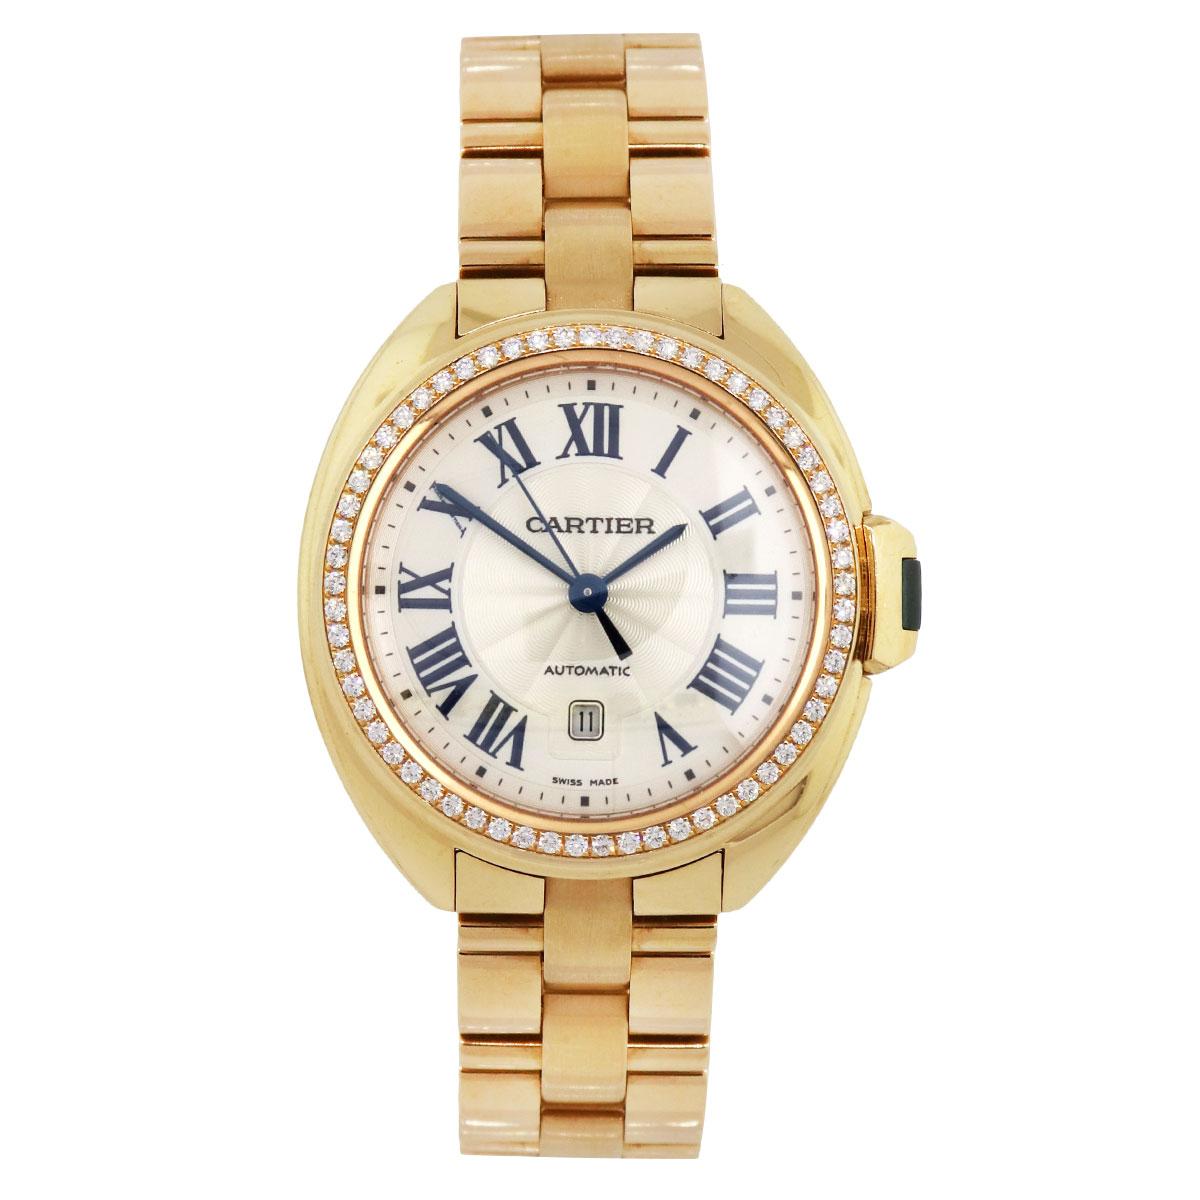 Brand: Cartier
MPN: WFCL0003
Model: Cle
Case Material: 18k rose gold
Case Diameter: 35mm
Crystal: Sapphire crystal
Bezel: Diamond bezel
Dial: White roman dial
Bracelet: 18k rose gold
Size: Will fit up to a 6.50″ wrist
Clasp: Double locking fold over